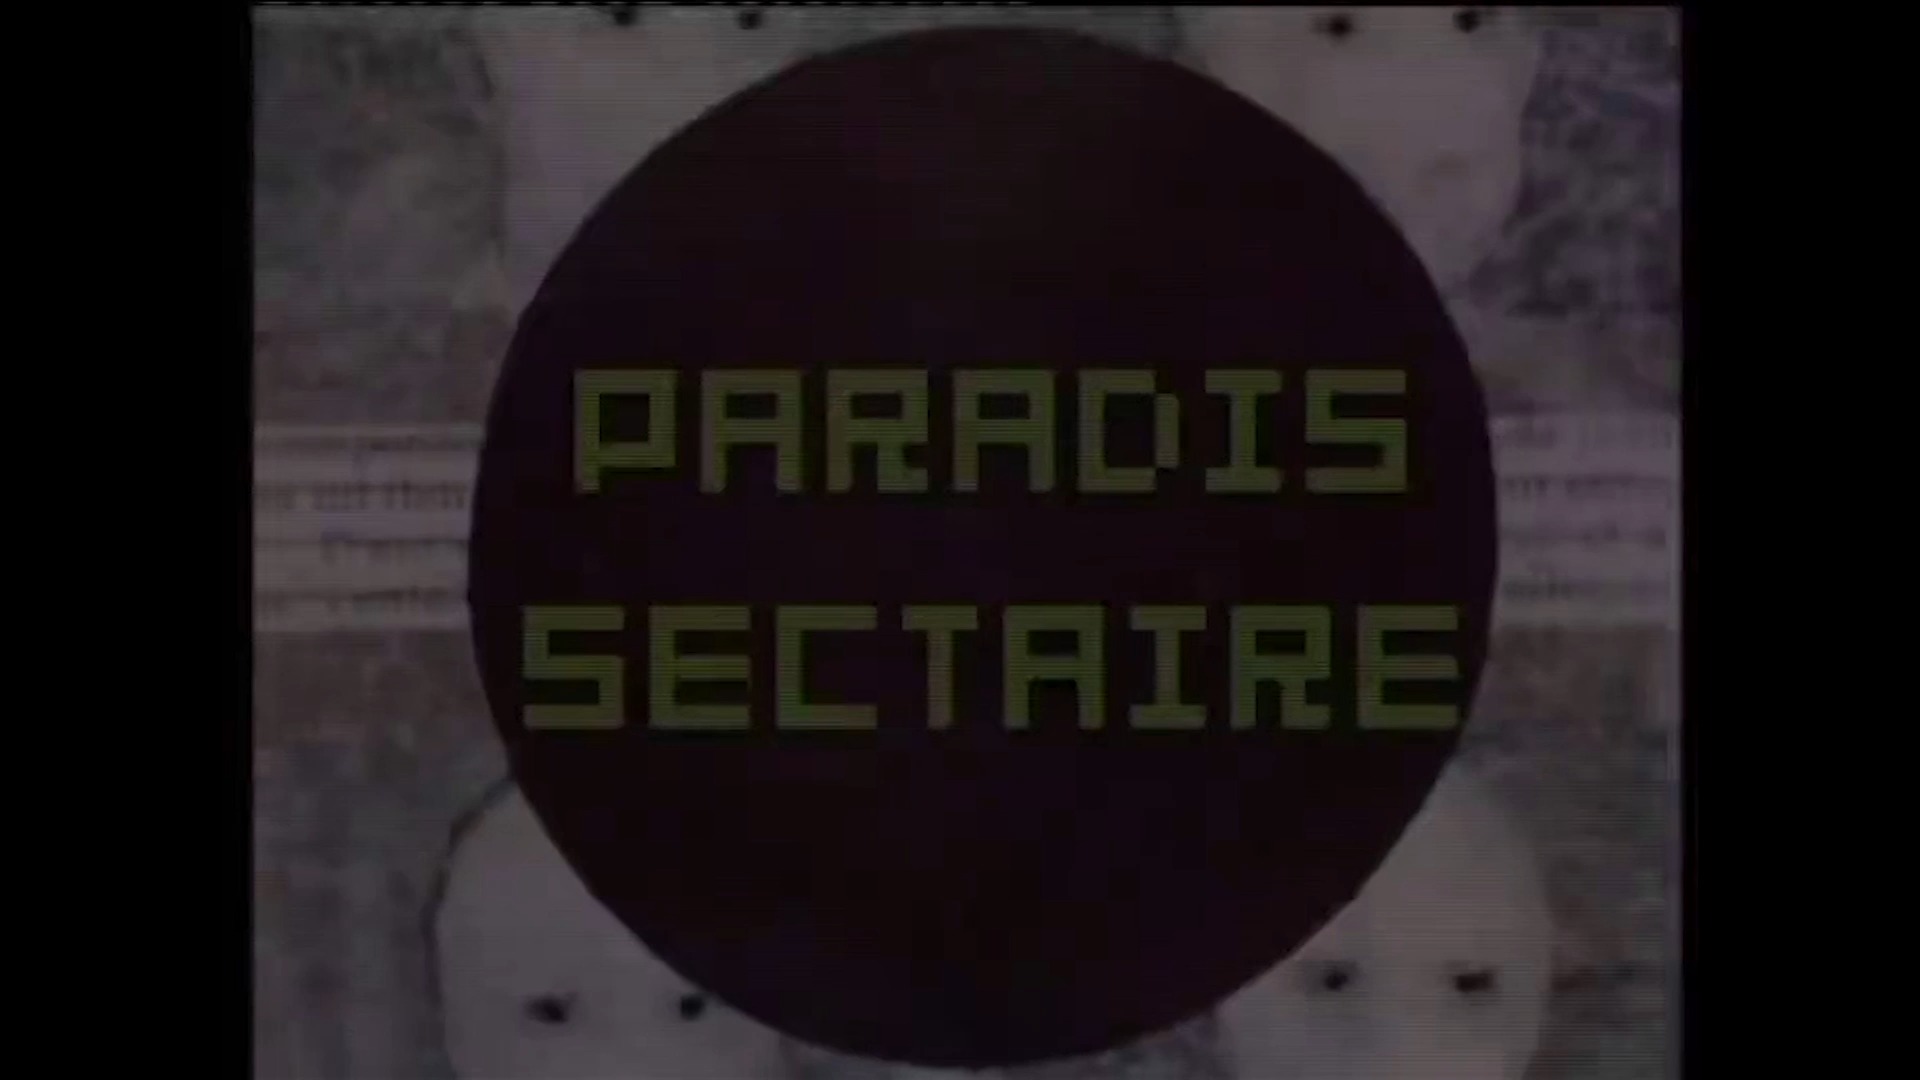 Paradis Sectaire